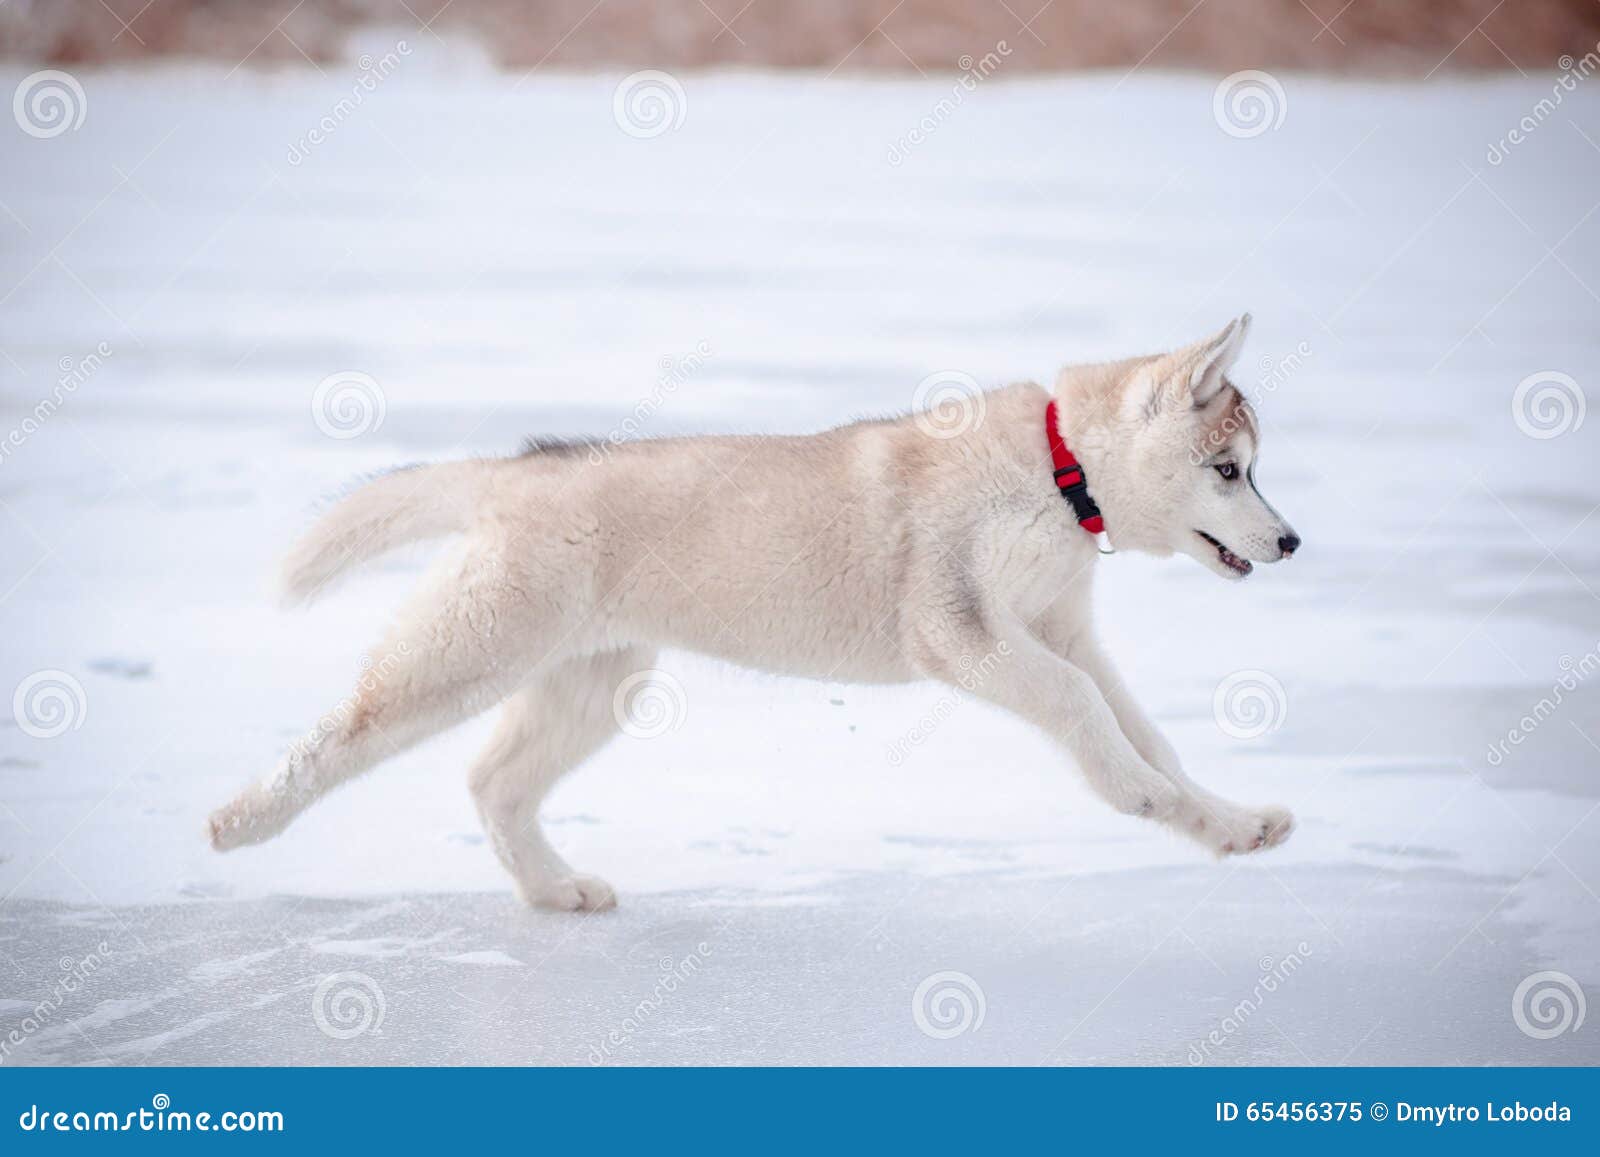 Husky puppy on the snow stock image. Image of eyes, outdoor - 65456375